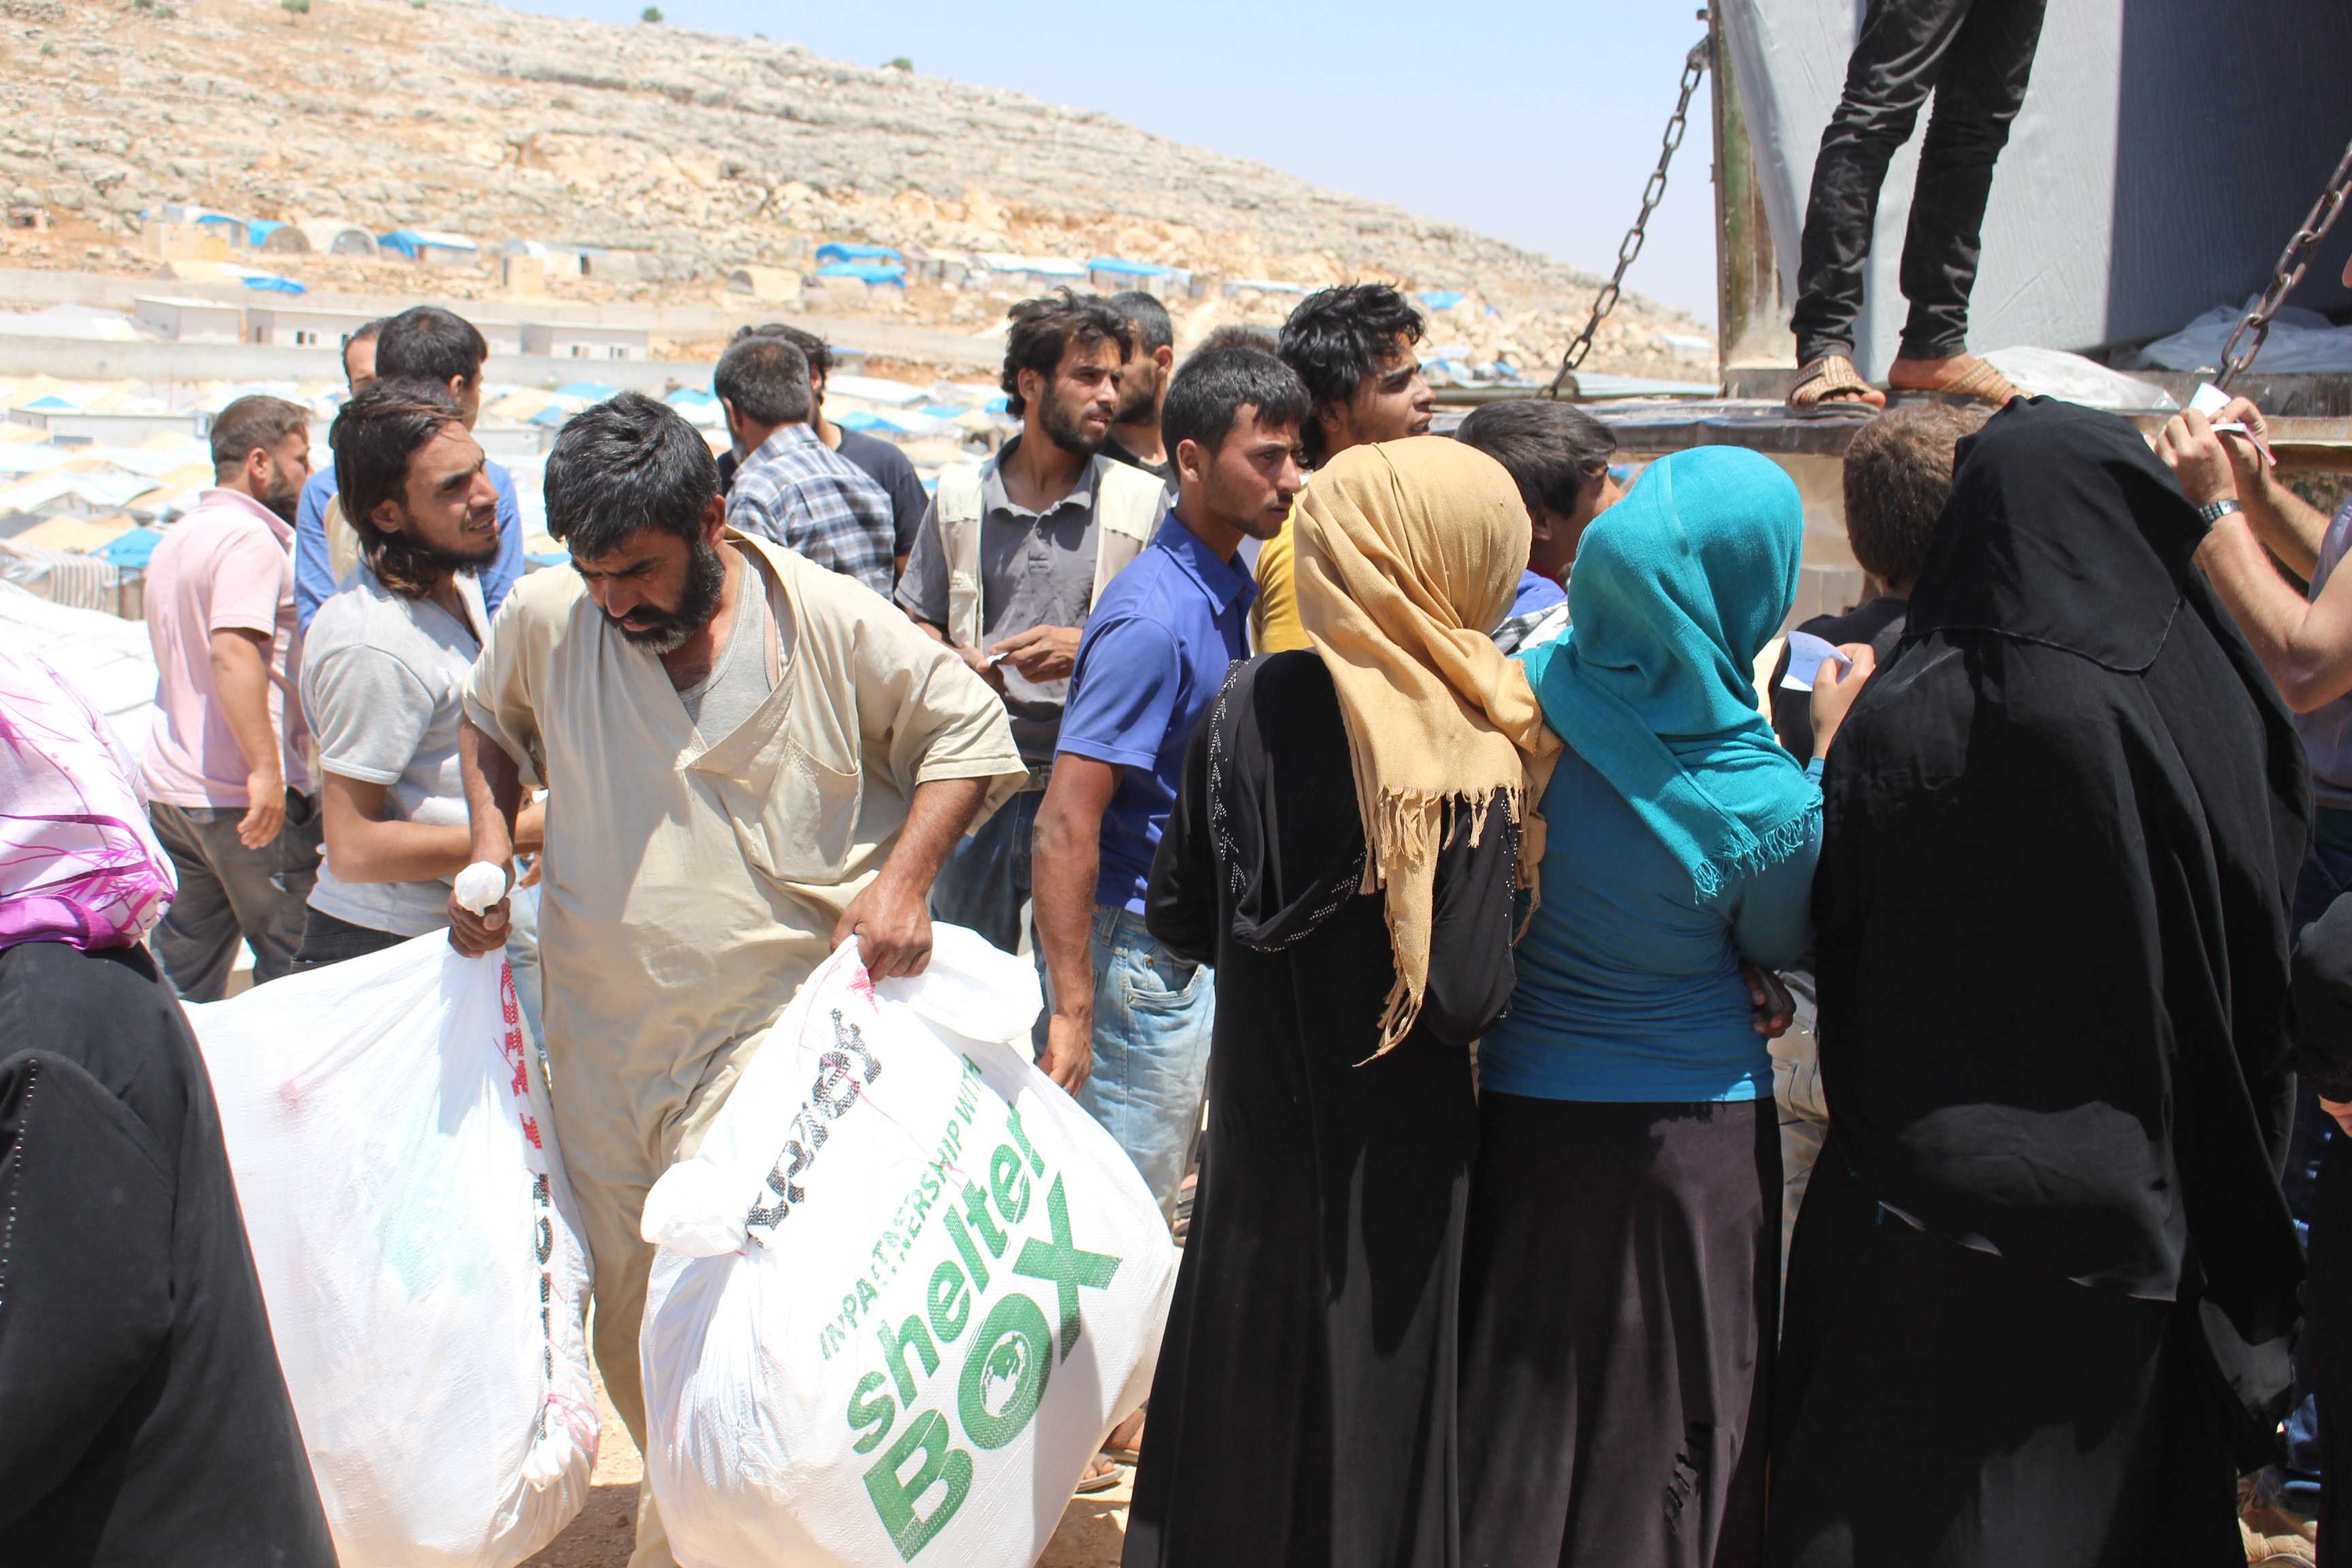 People gather around the truck to receive aid